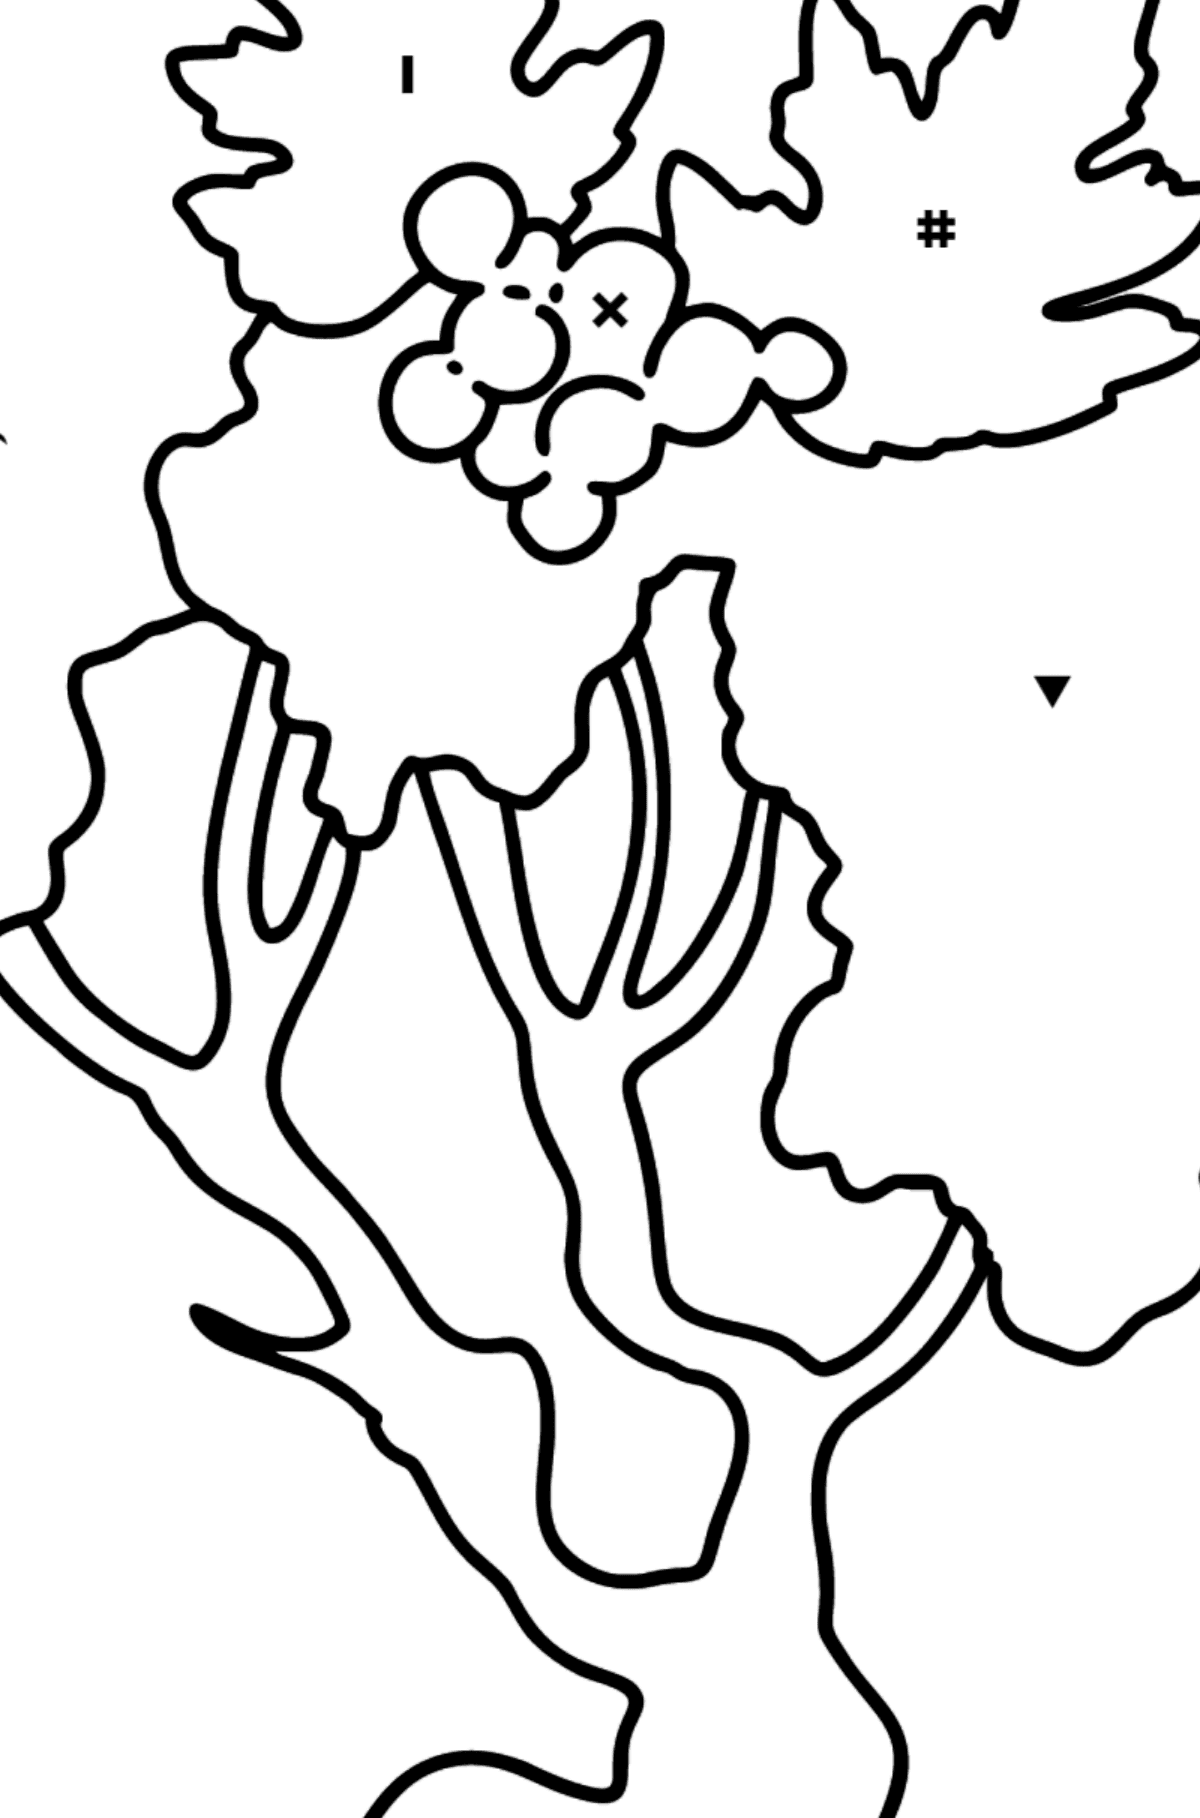 Hawthorn coloring page - Coloring by Symbols for Kids